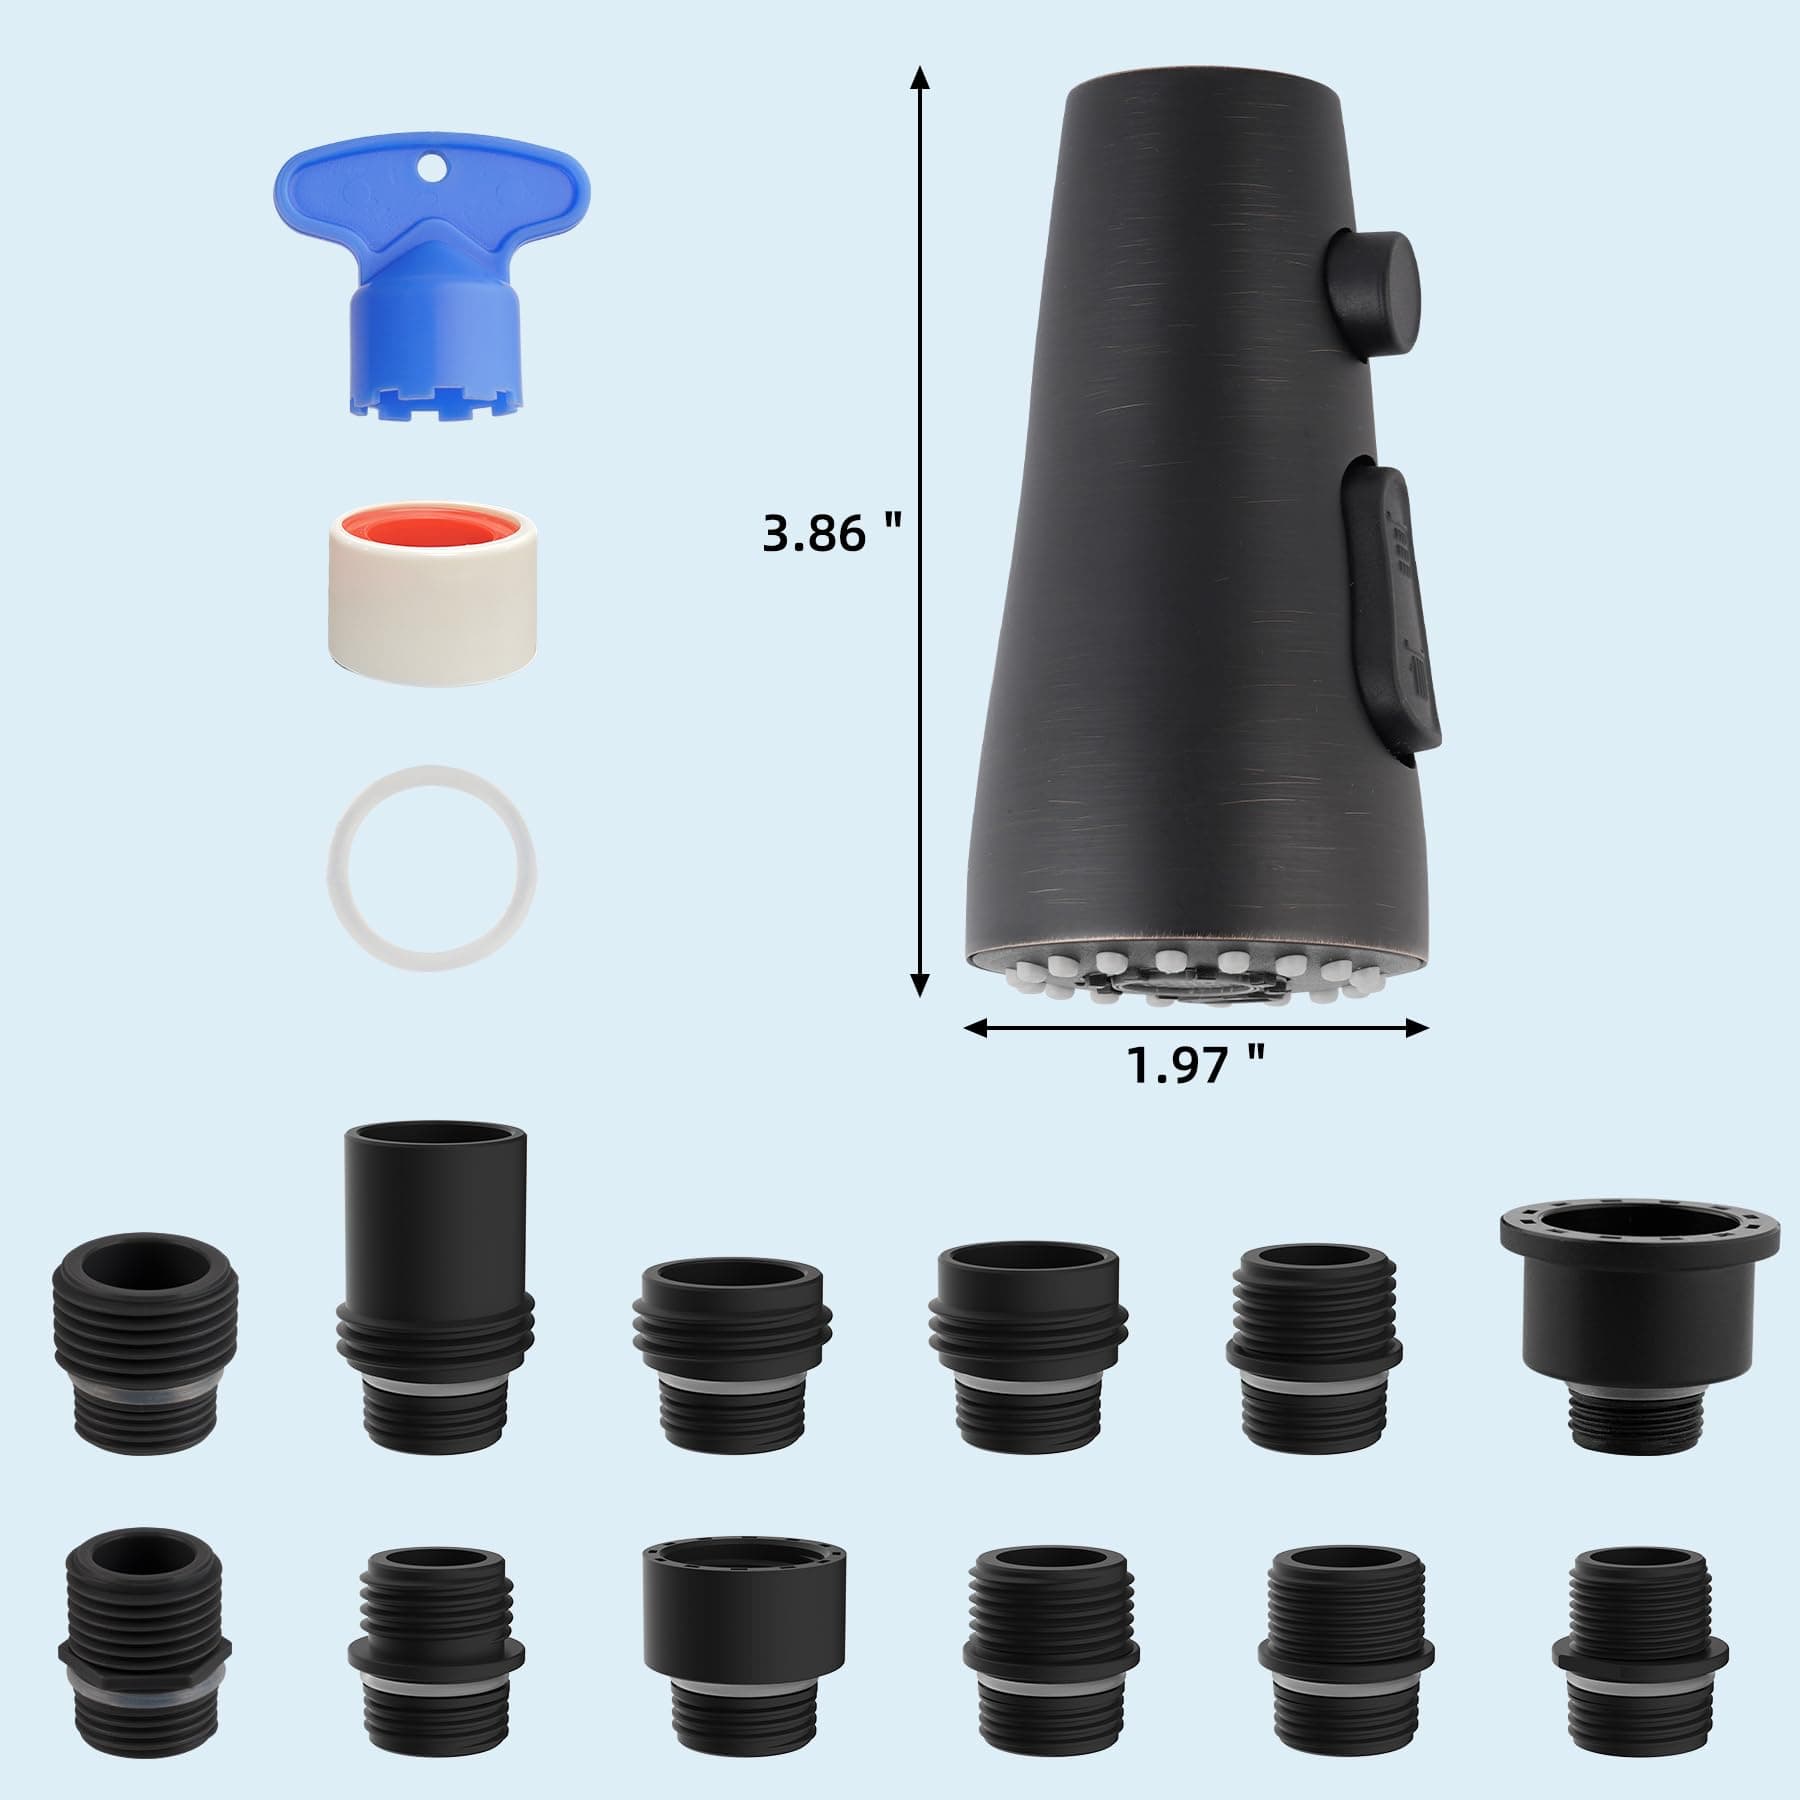 Hibbent Faucet Aerator Metal Pull Down Spray Head for Kitchen Faucet, Kitchen Sink Spray Nozzle with 12 Adapters, Faucet Head Replacement Compatible with Moen, American Standard, Delta, Kohler Faucet, Oil Rubbed Bronze